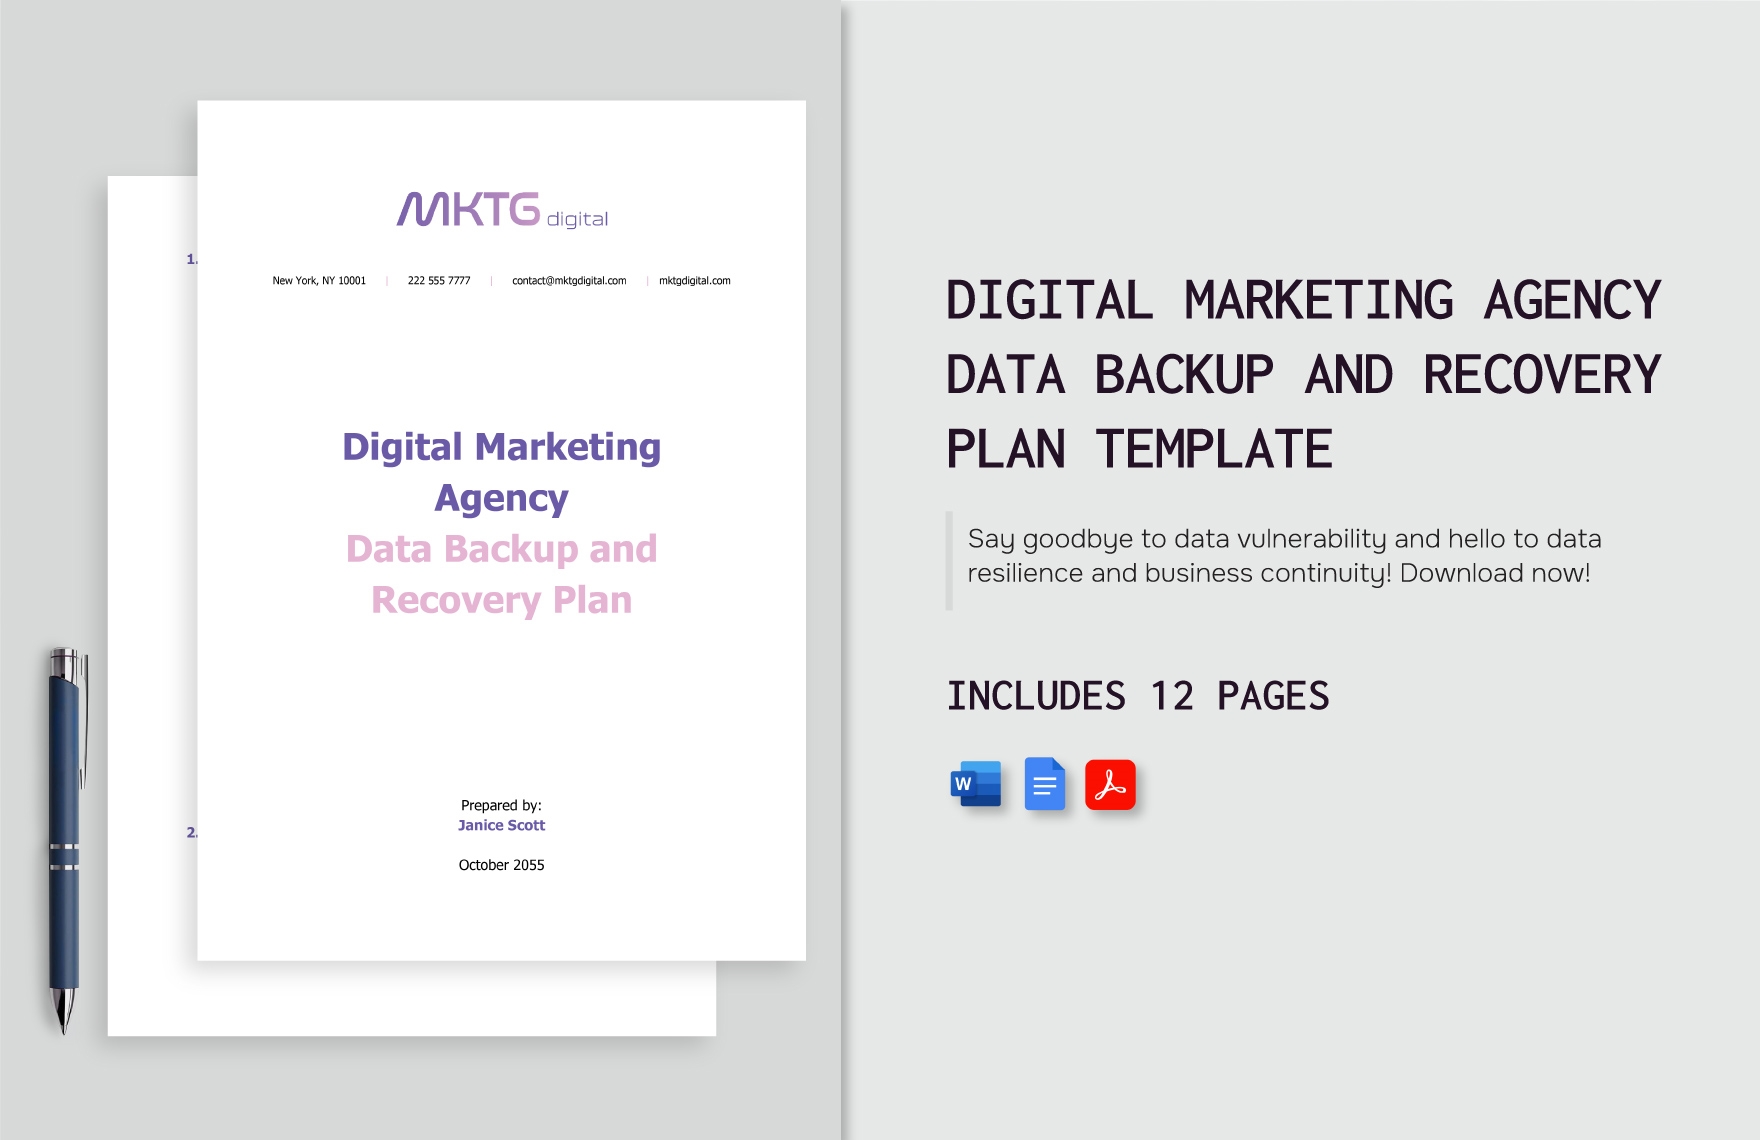 Digital Marketing Agency Data Backup and Recovery Plan Template